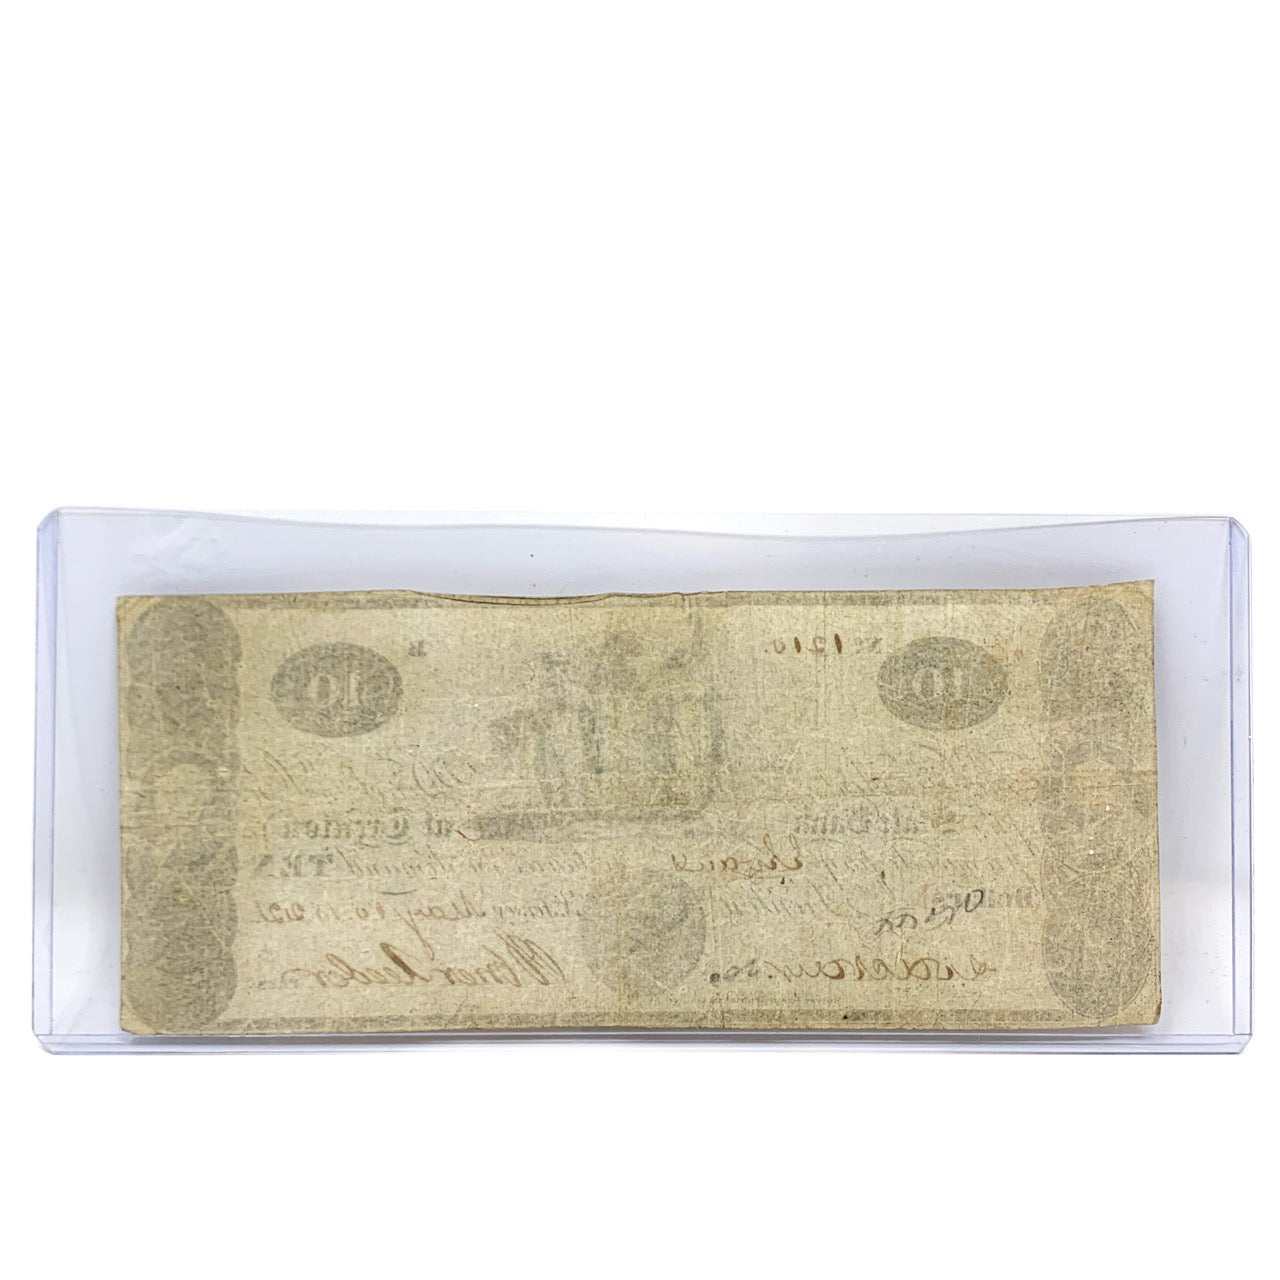 1822 $10 Trenton NJ State Bank Obsolete Currency